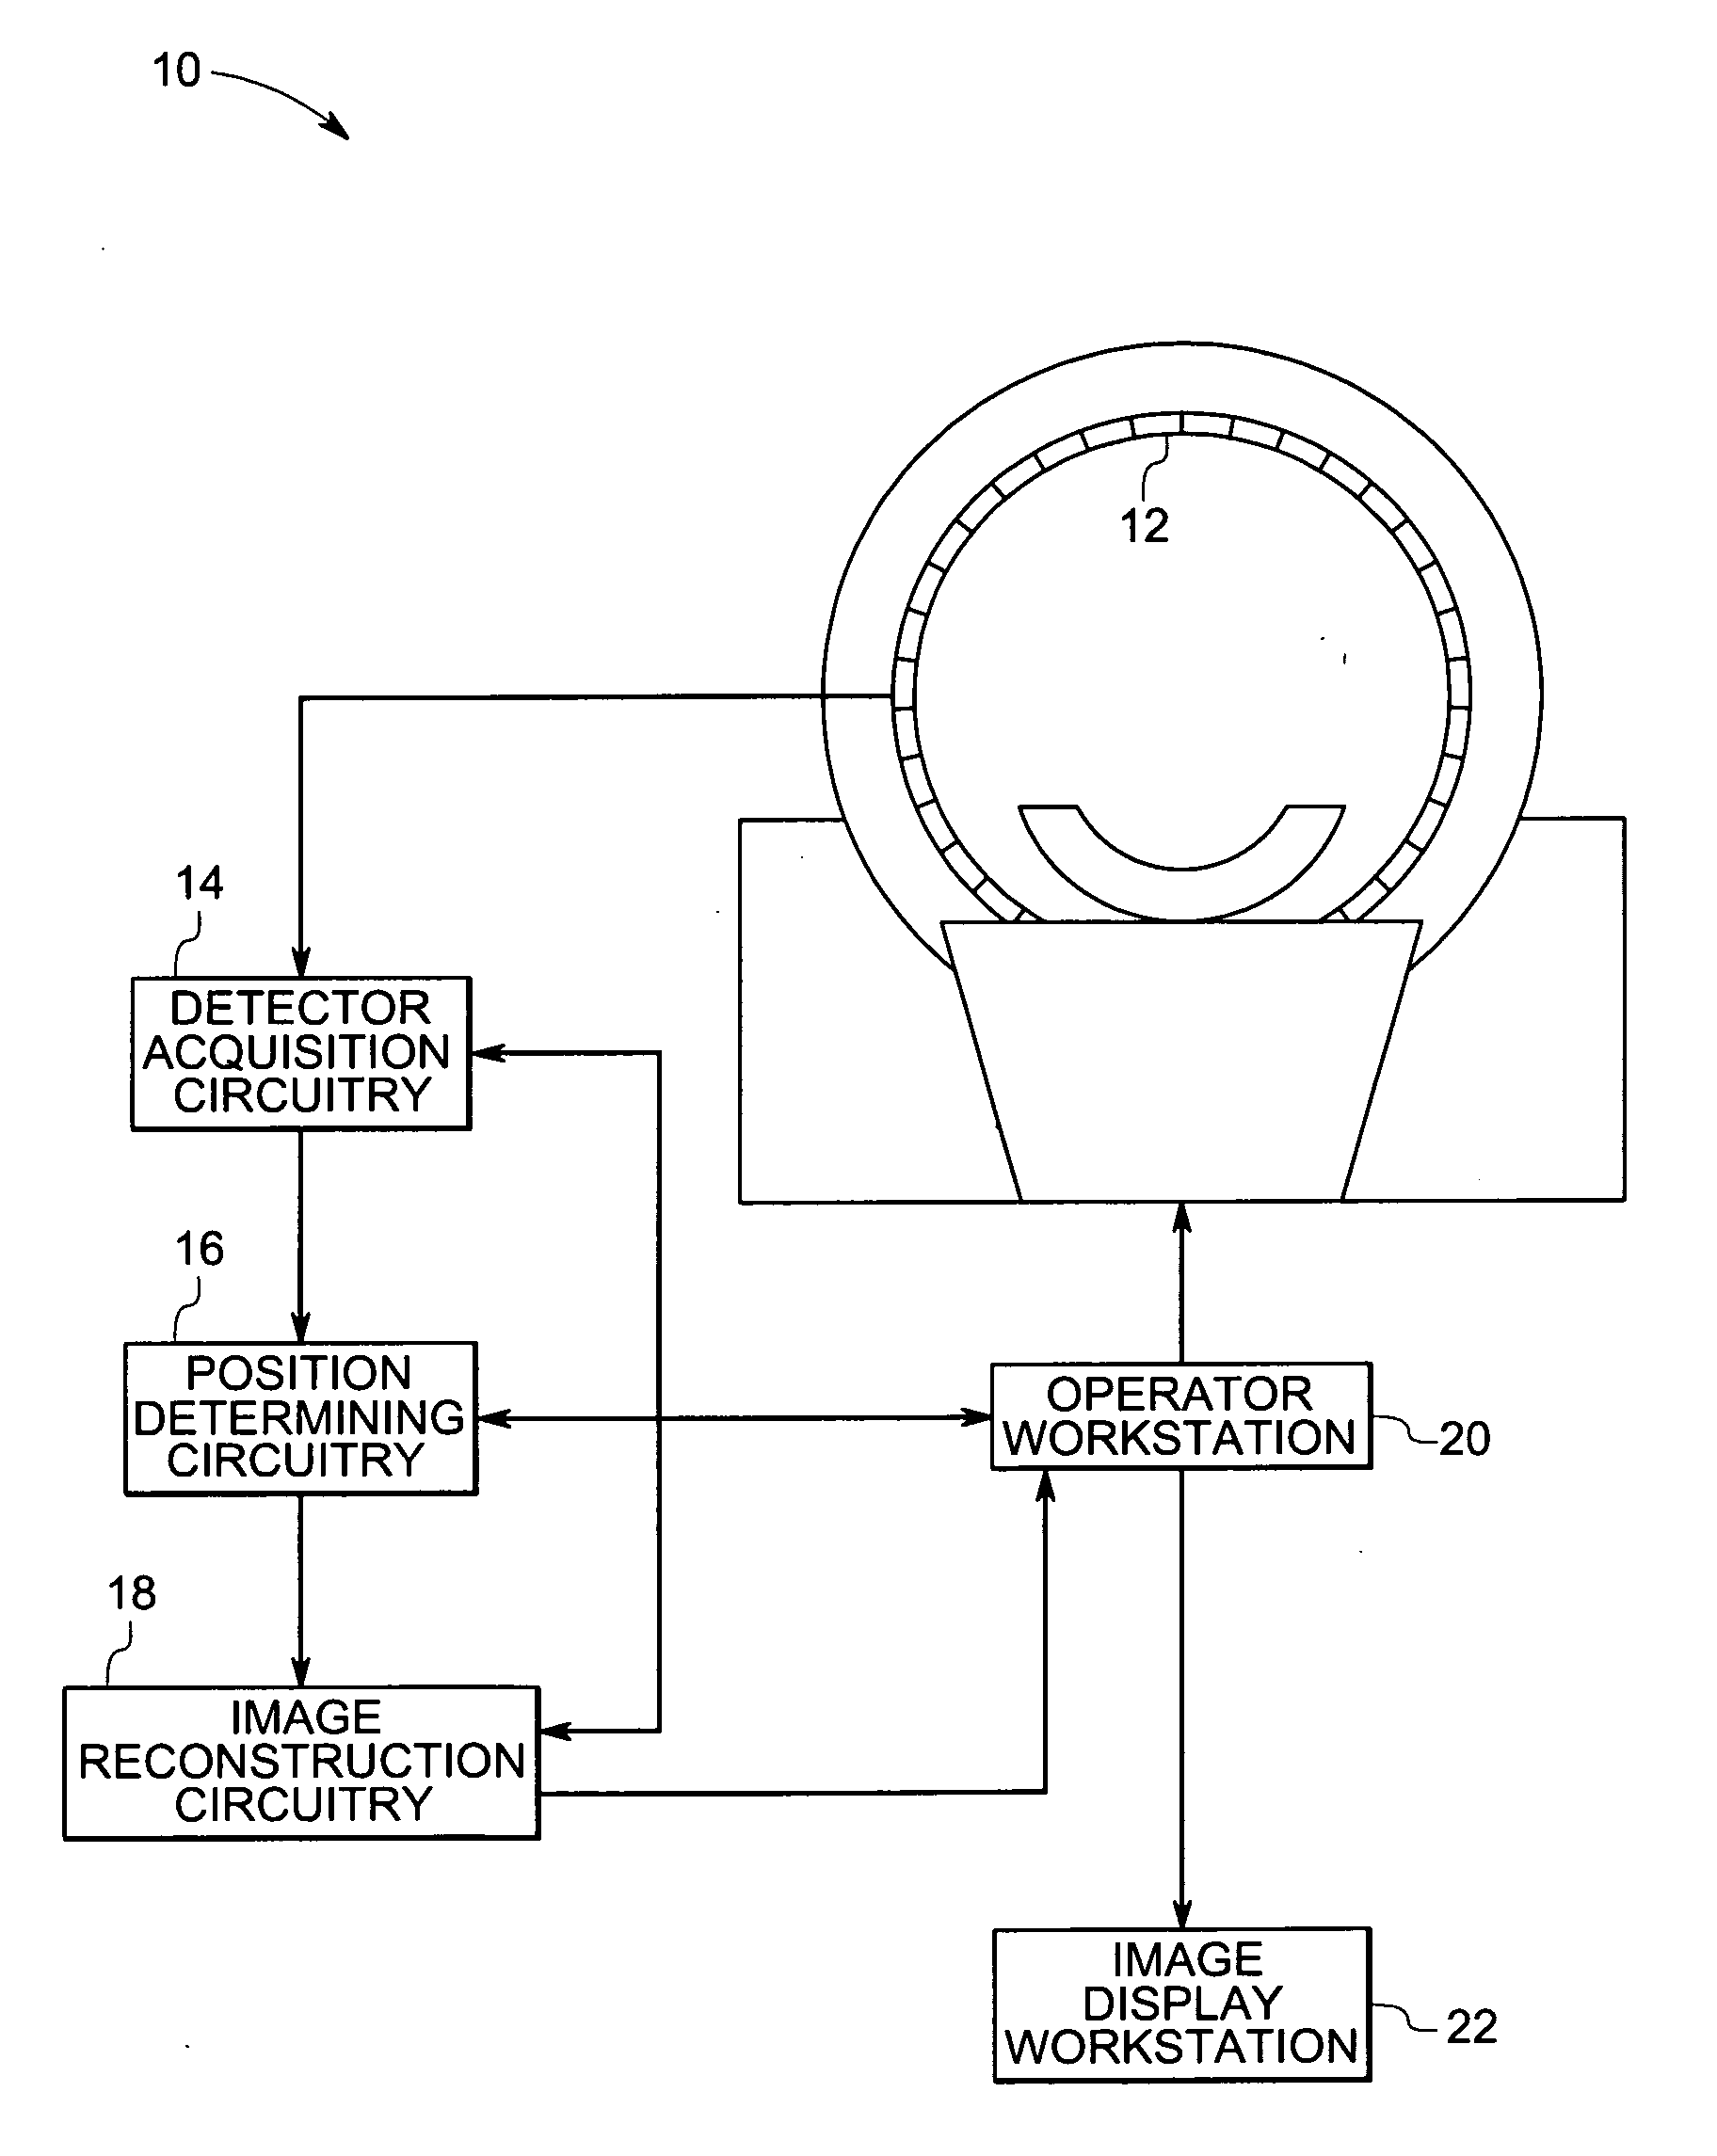 Systems and methods for improving position resolution of charge-sharing position sensitive detectors